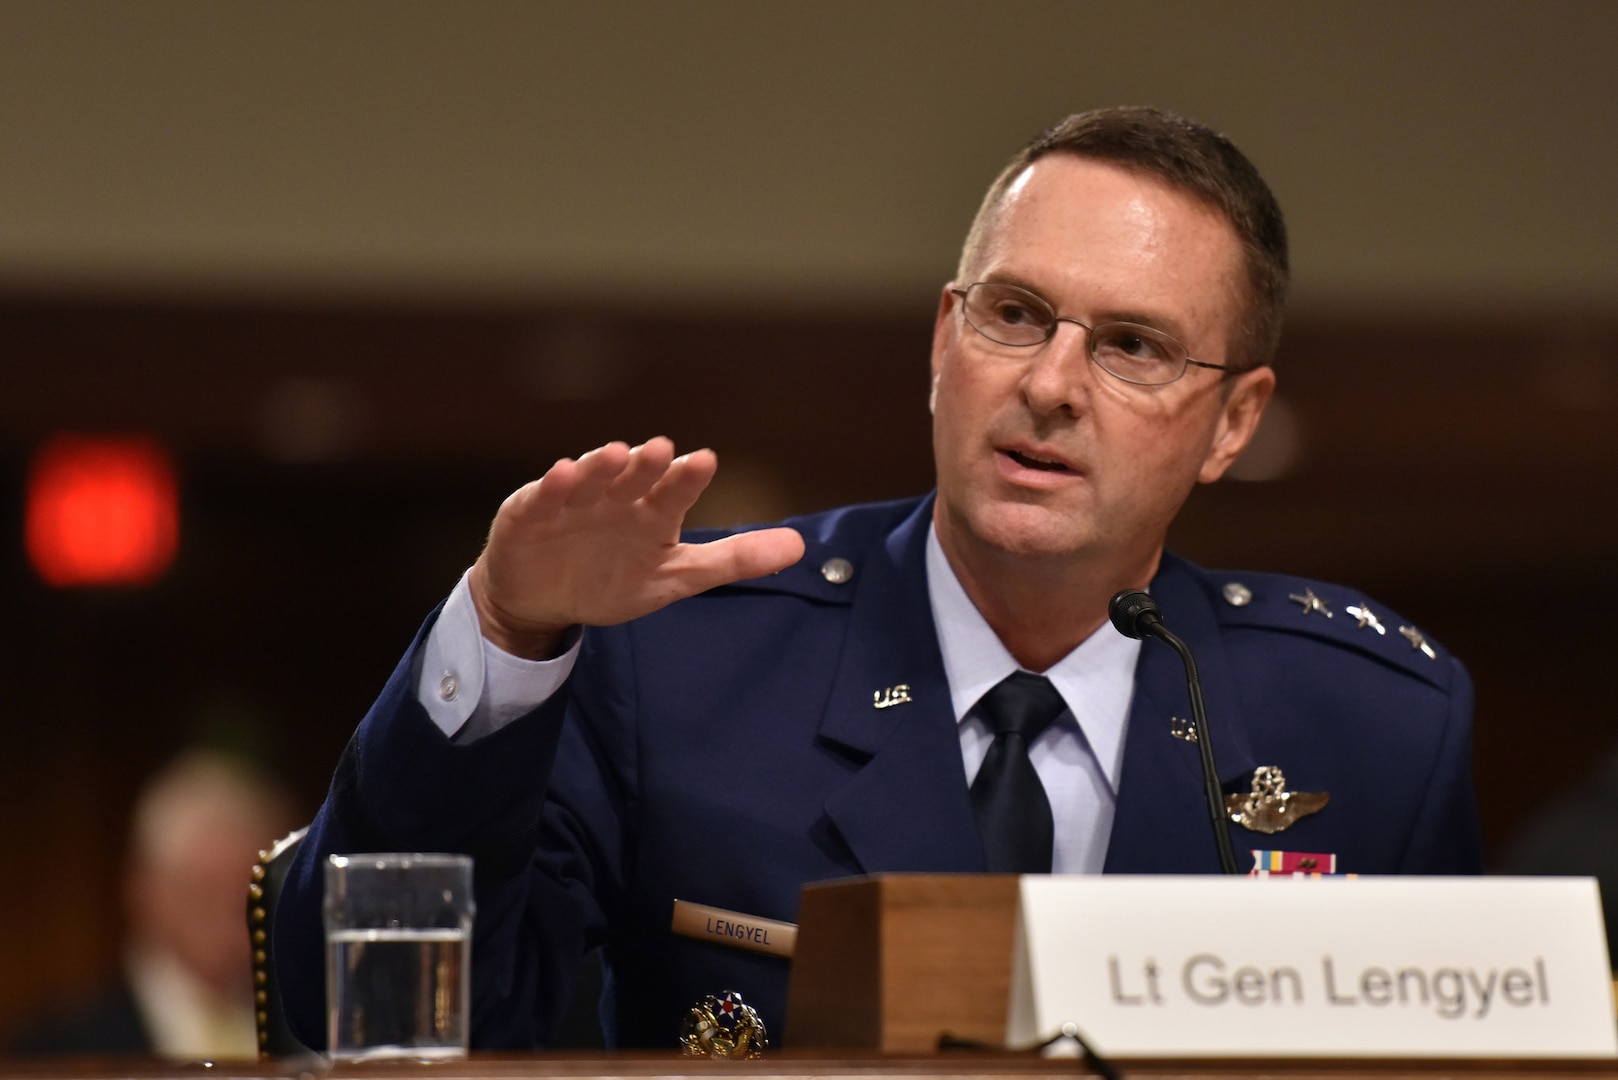 Air Force Lt. Gen. Joseph Lengyel testifies before the U.S. Senate Committee on Armed Services at a confirmation hearing for his appointment to the grade of general and to be chief of the National Guard Bureau on June 21, 2016.
